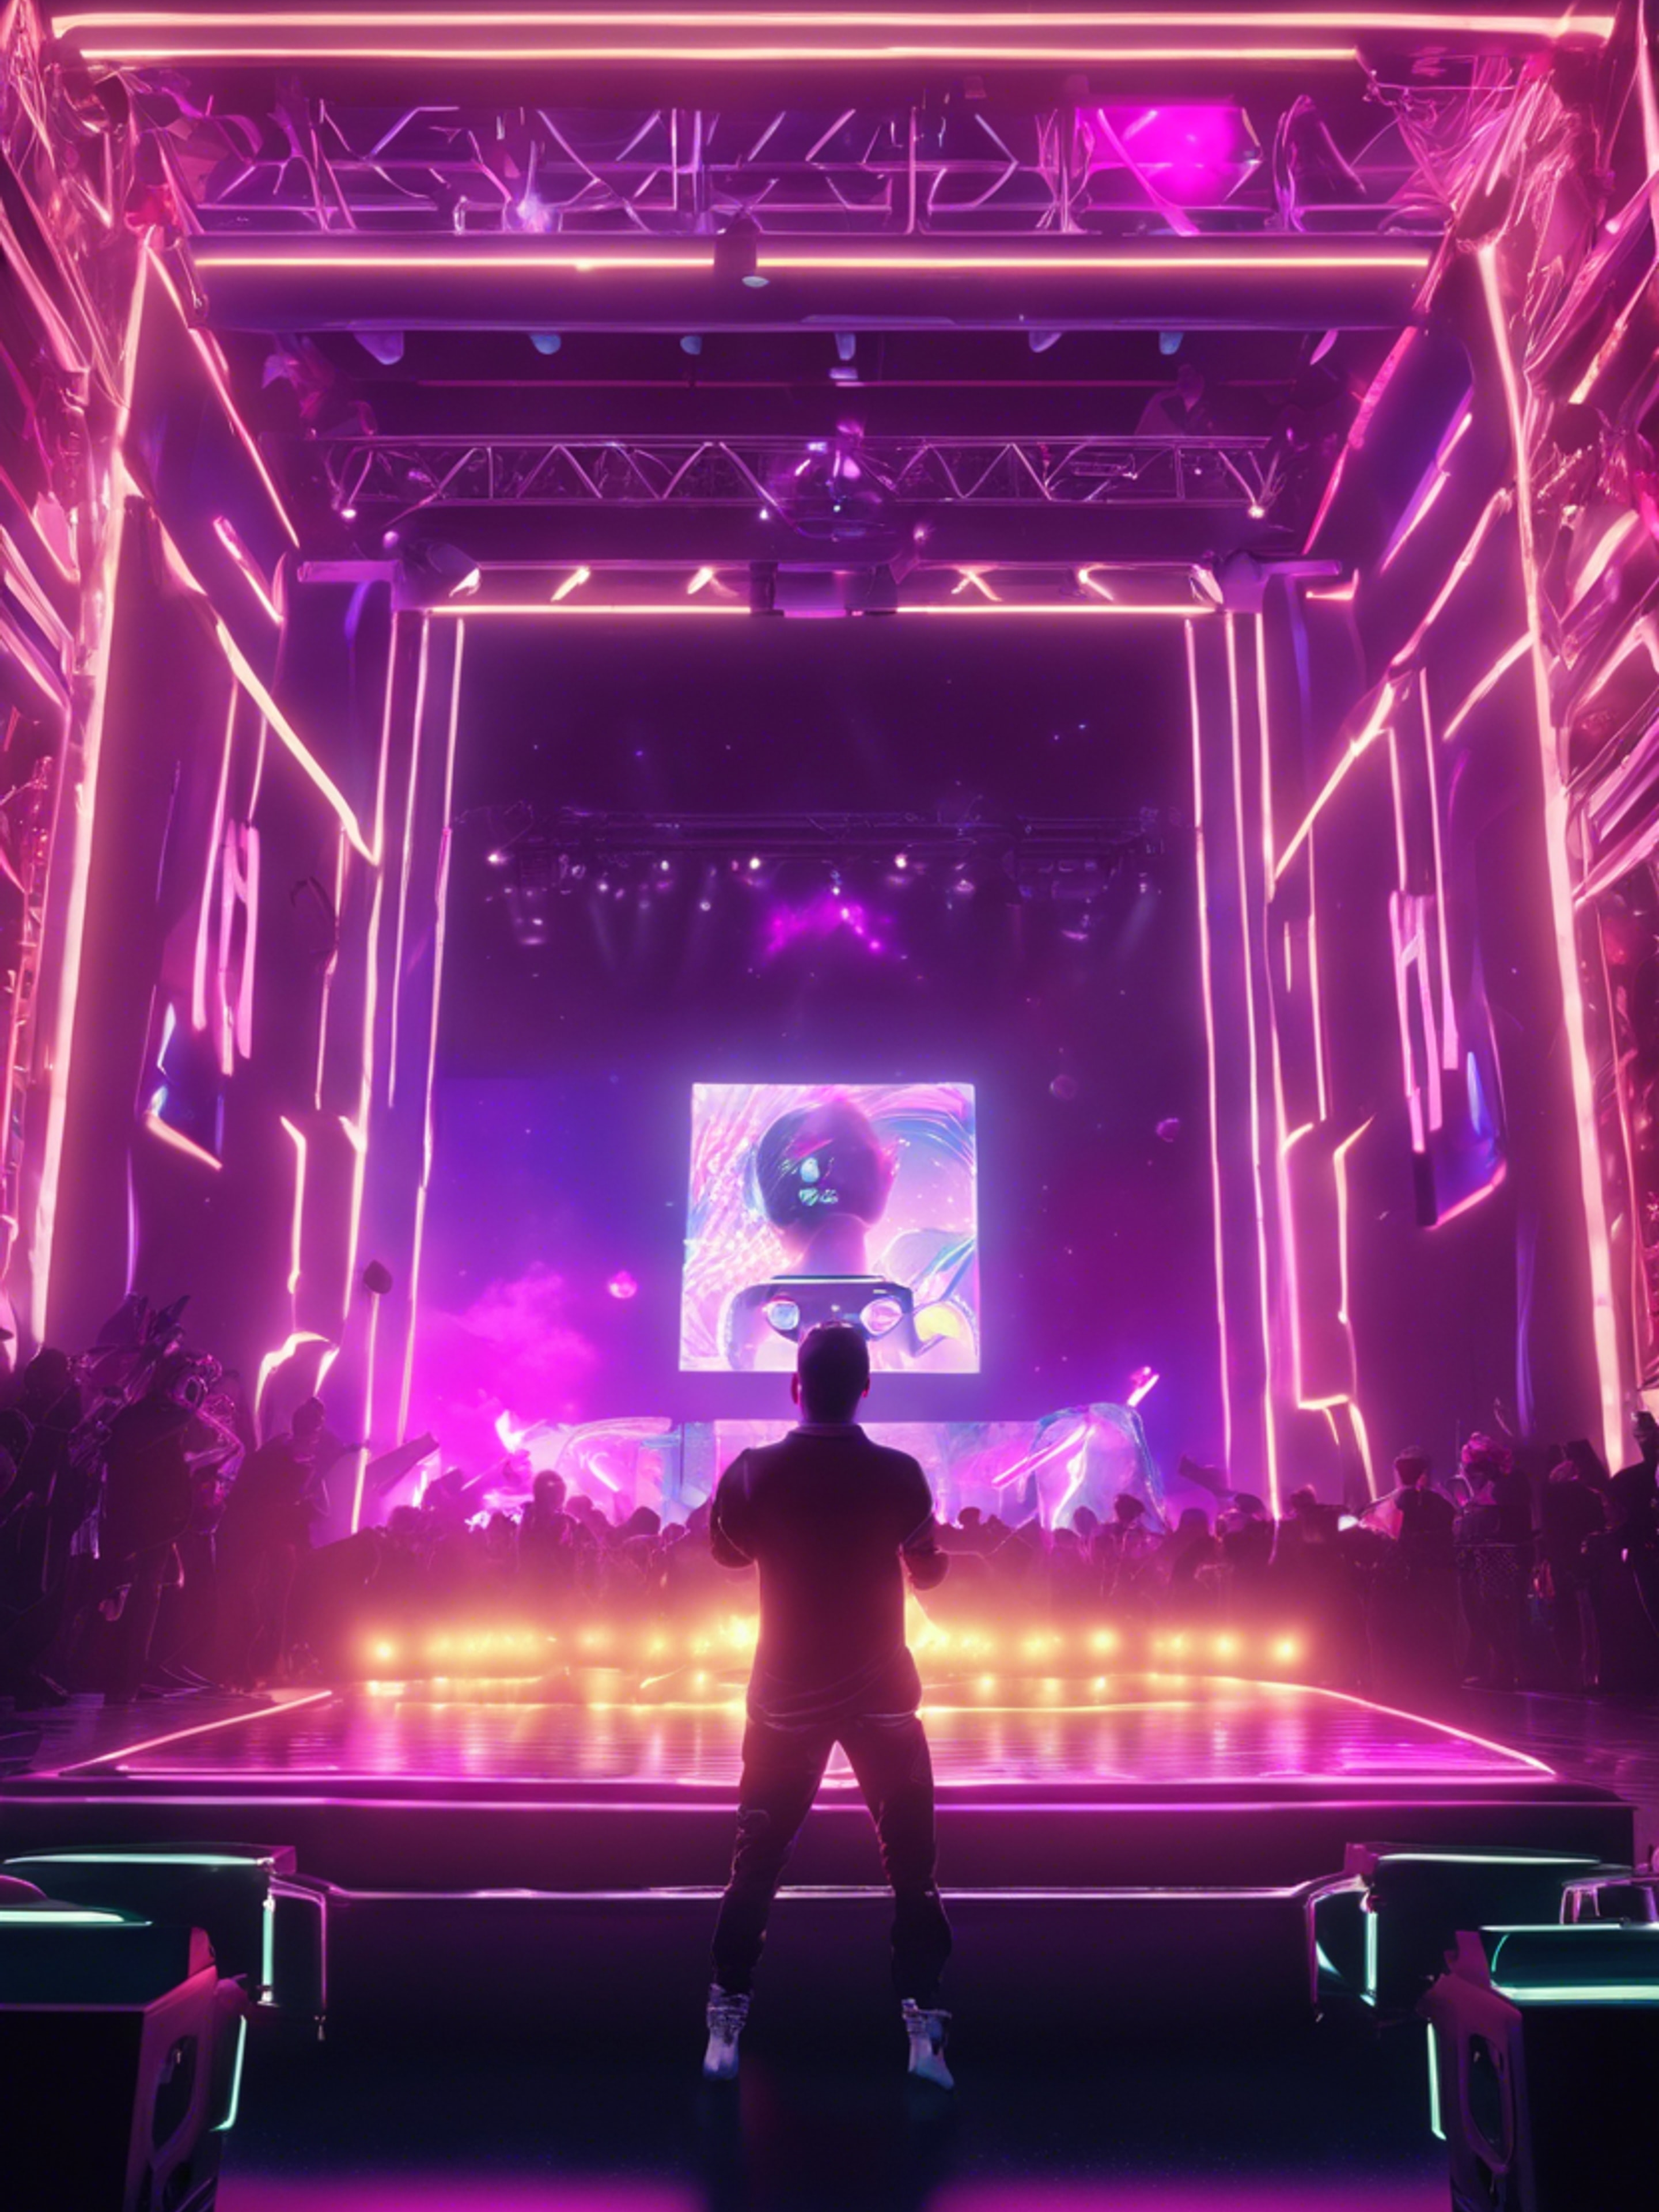 A virtual concert in a Y2K gaming environment, with neon spotlights showcasing a digital avatar performing onstage. Шпалери[570c0802add746f5a0b1]